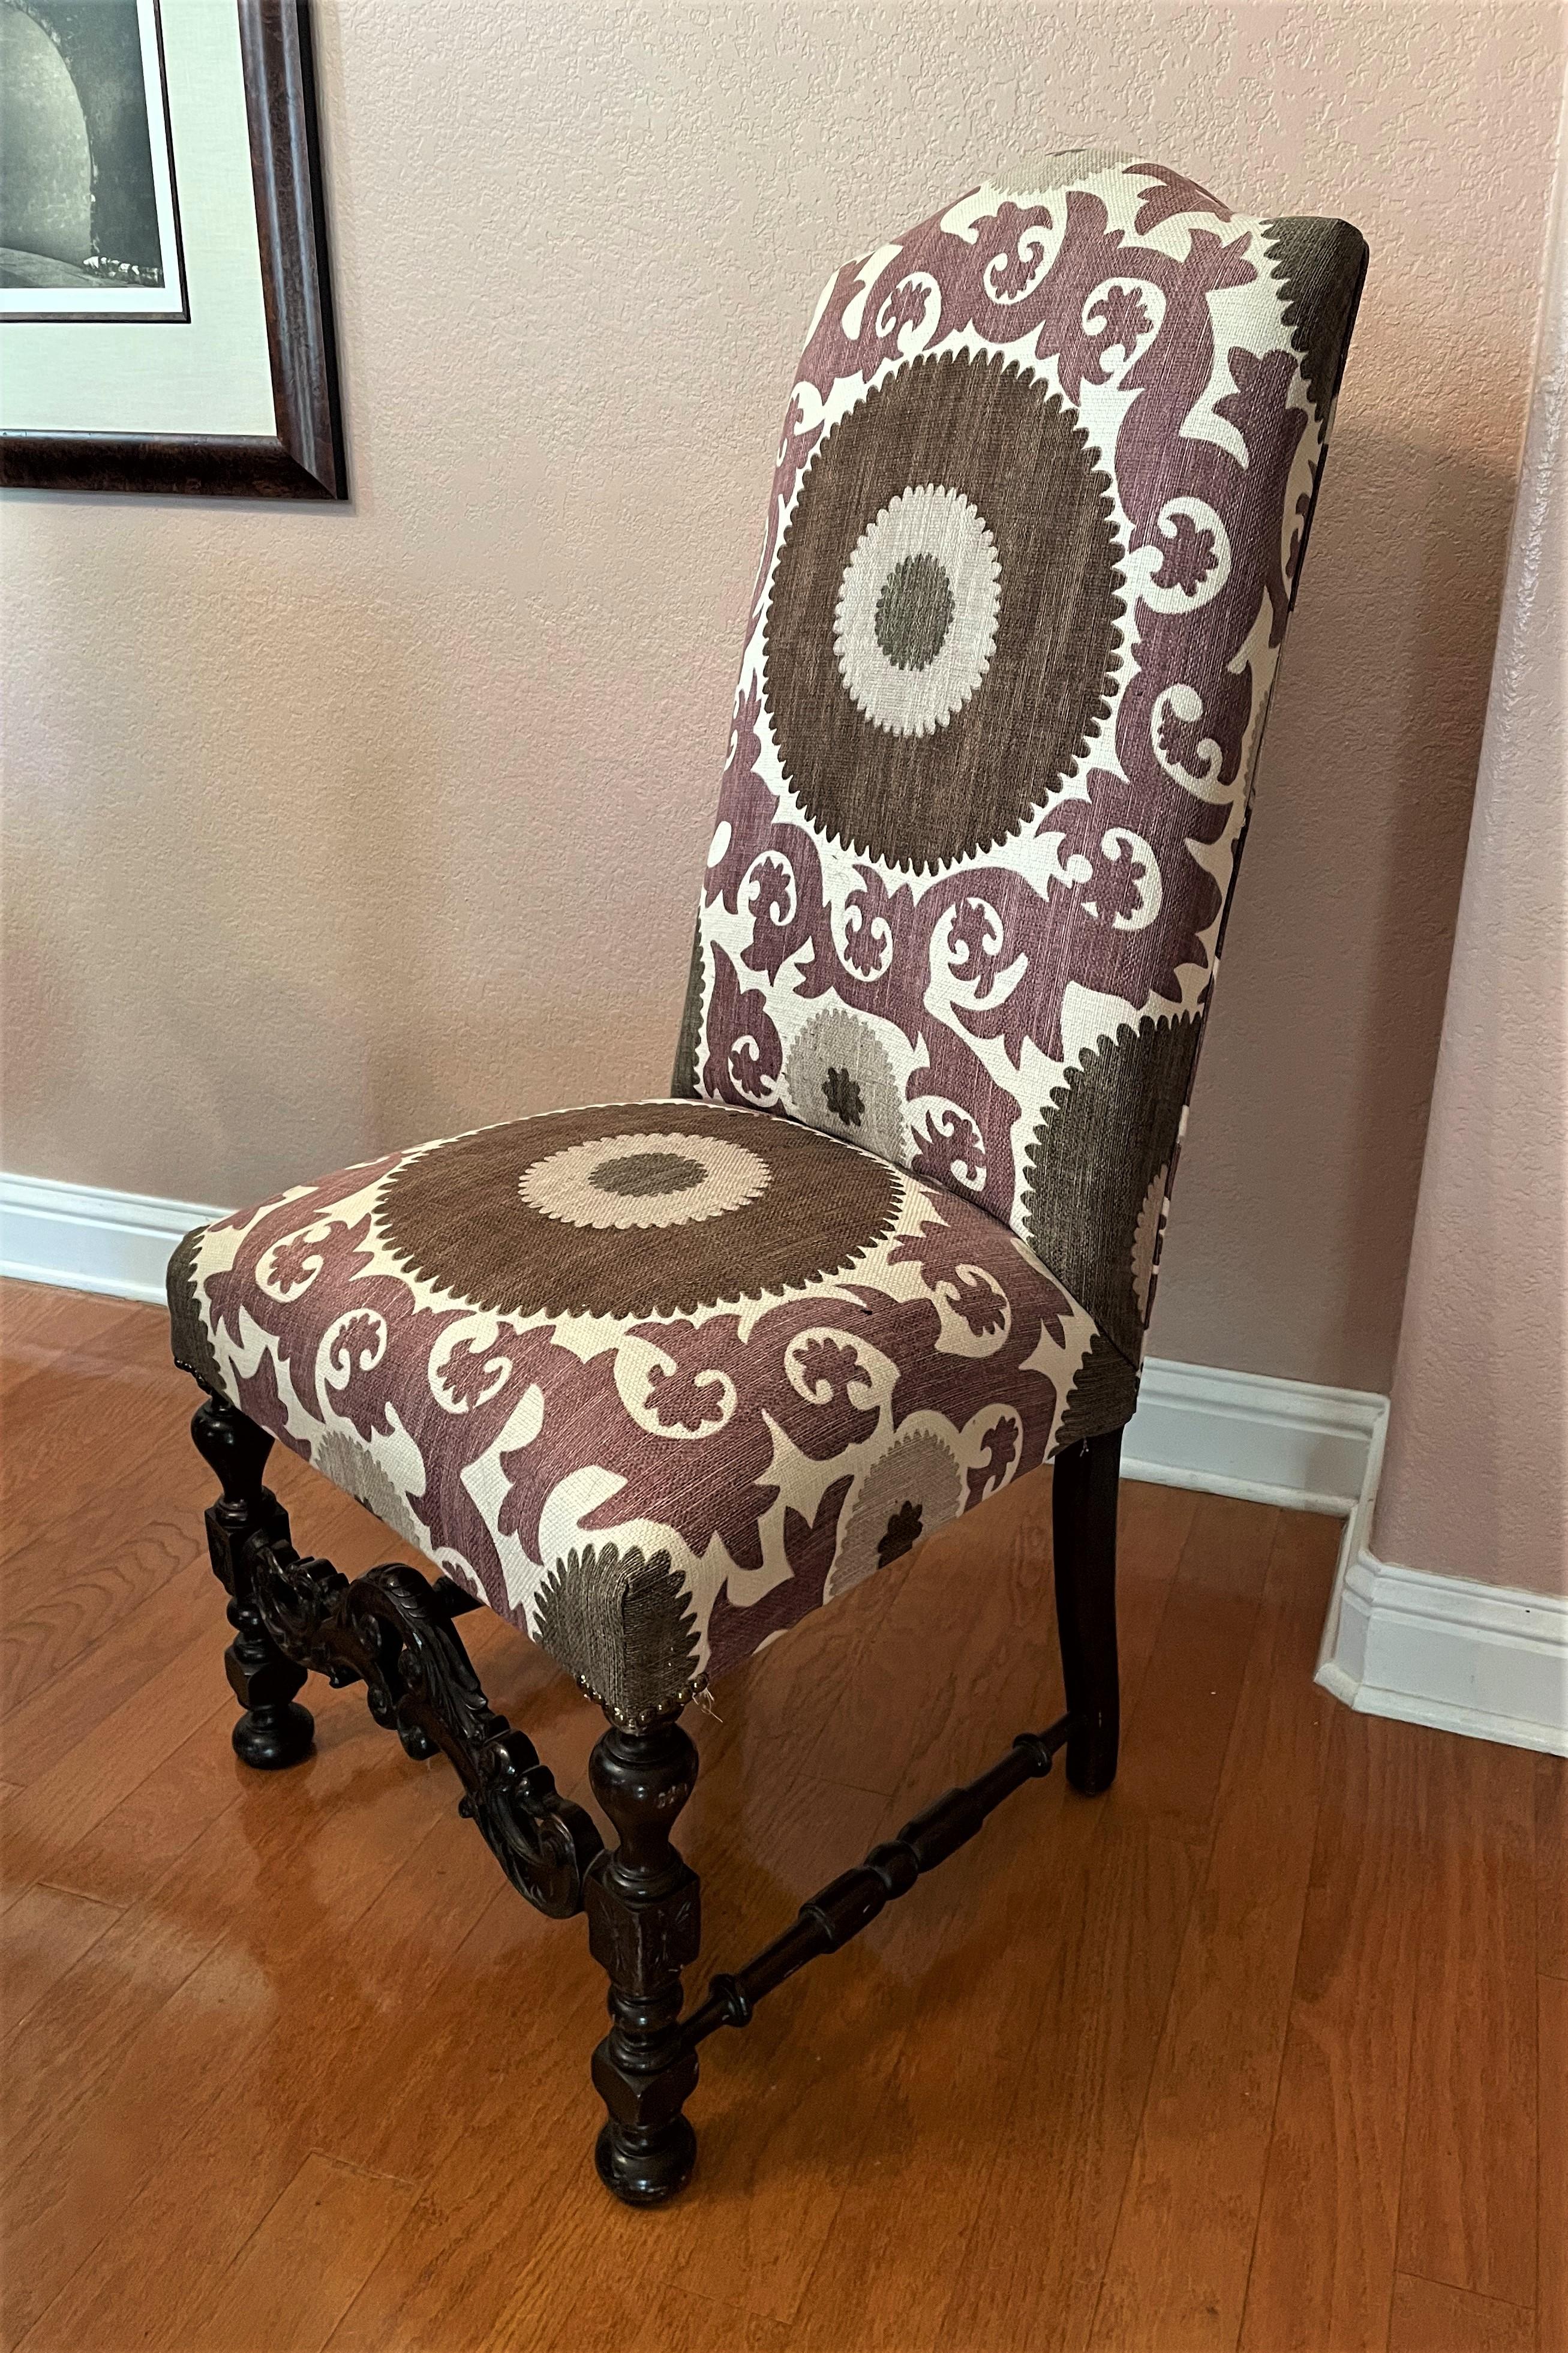 Spanish 1940s Santa Barbara-Style Side Chair in Lavender, Taupe, Brown with Walnut Frame For Sale